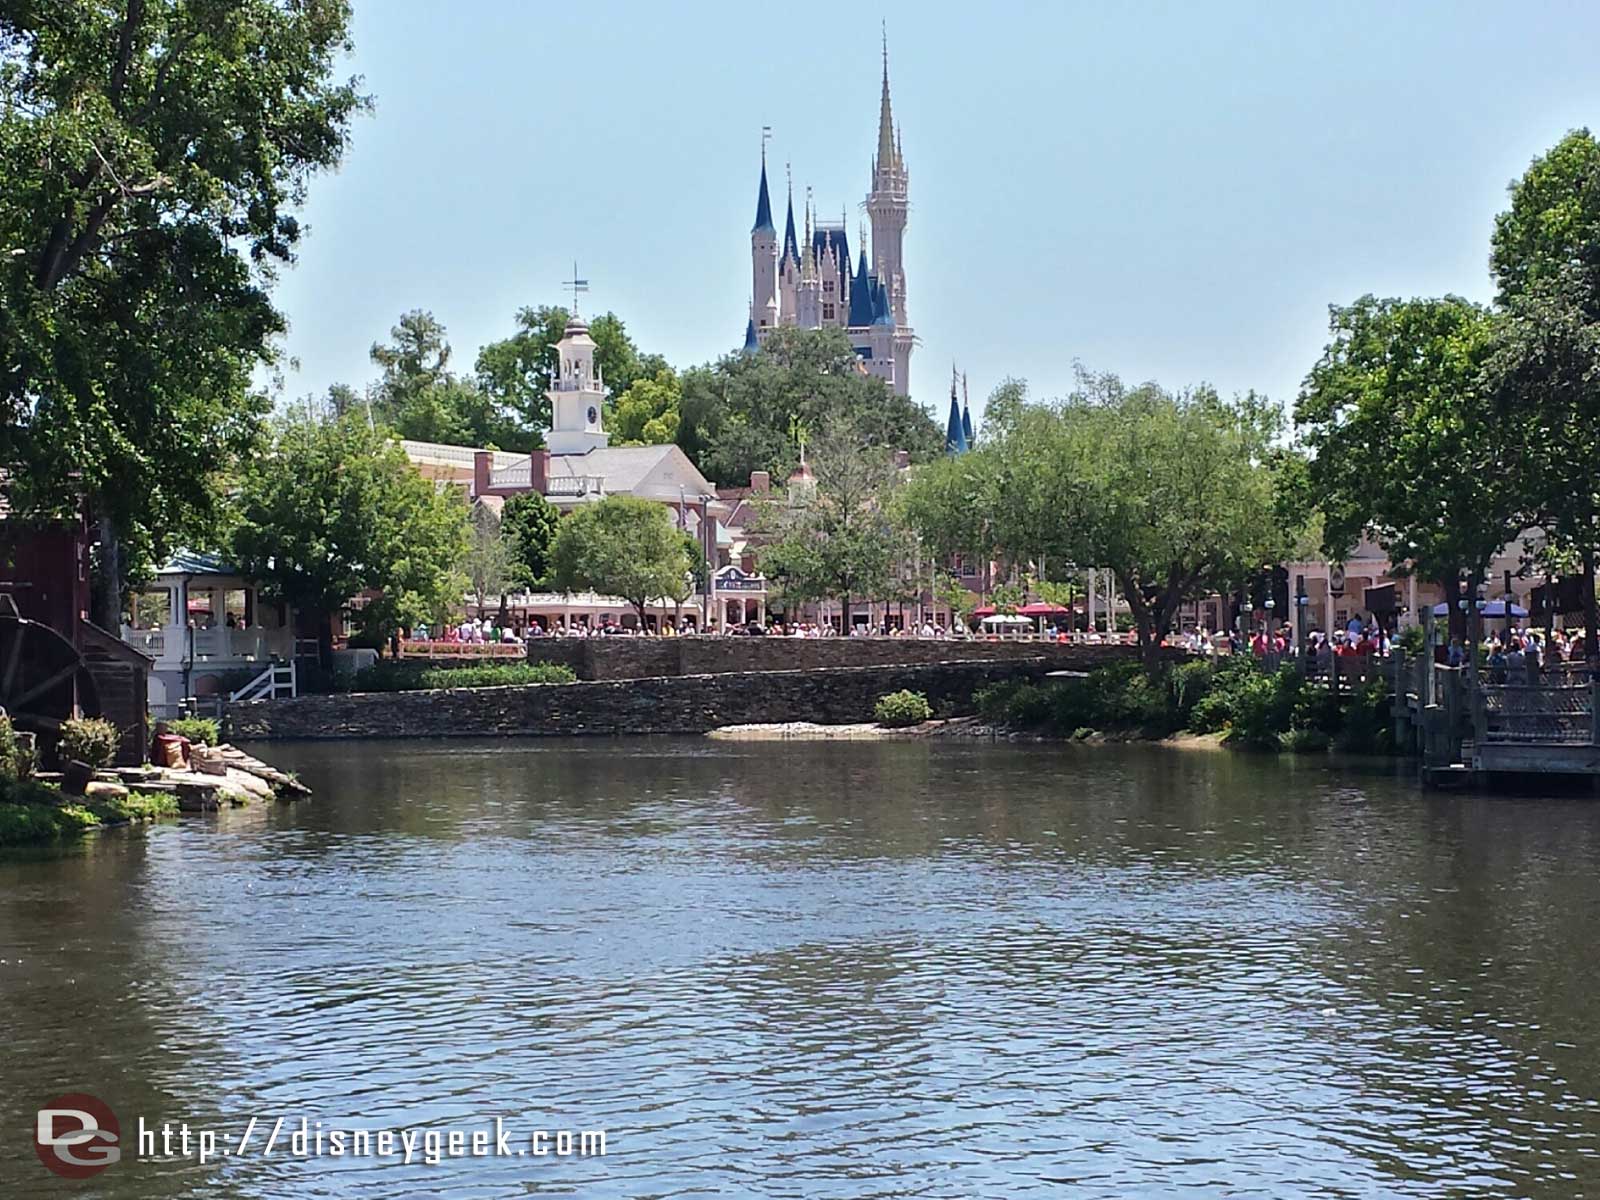 Cinderella Castle beyond the Rivers of America